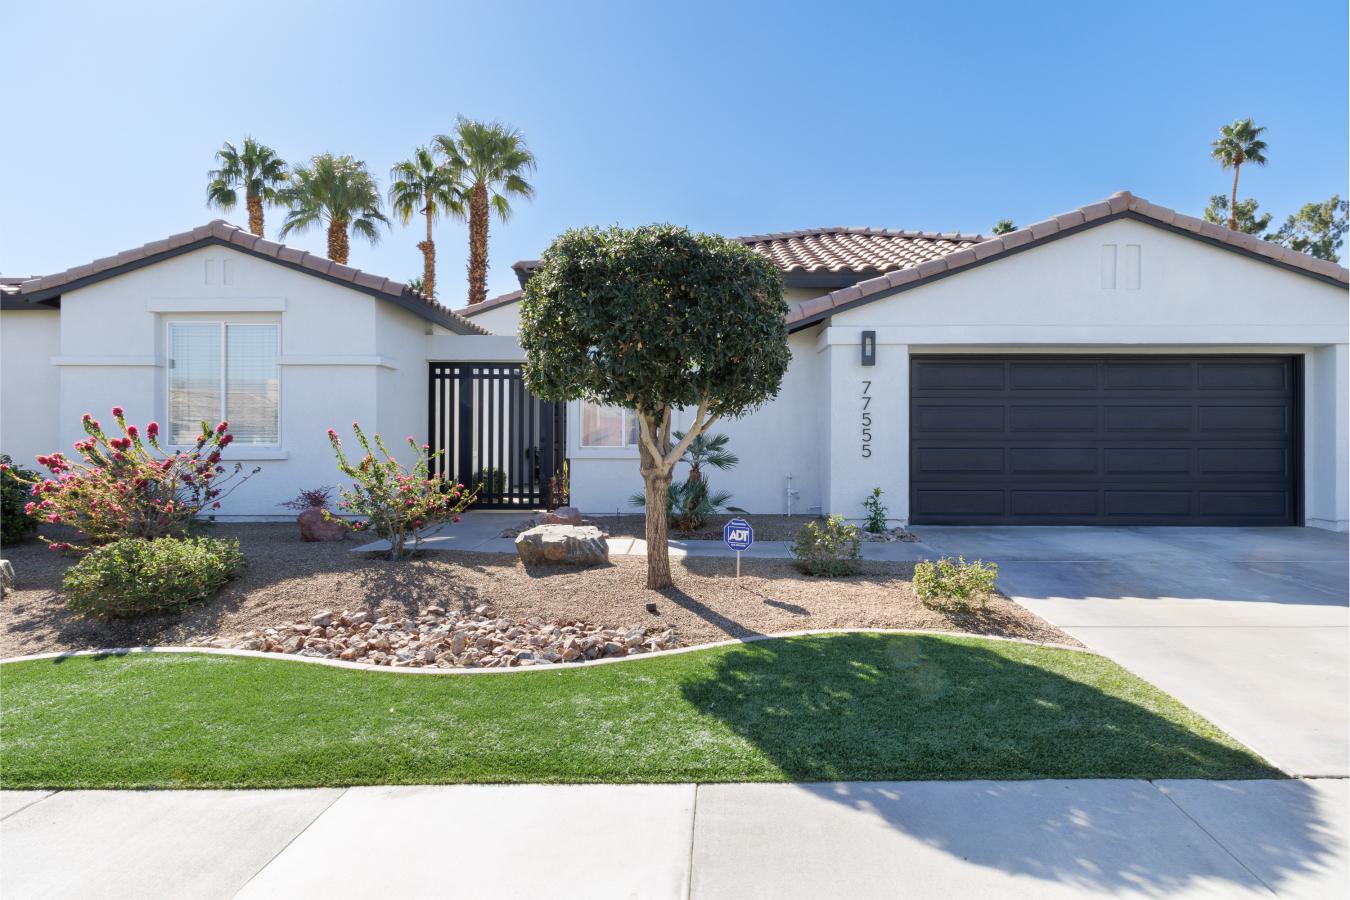 132 77555 Ashberry Court, Palm Desert, California, 92211, United States, 4 Bedrooms Bedrooms, ,3 BathroomsBathrooms,Residential,For Sale,77555 Ashberry Court,1227134